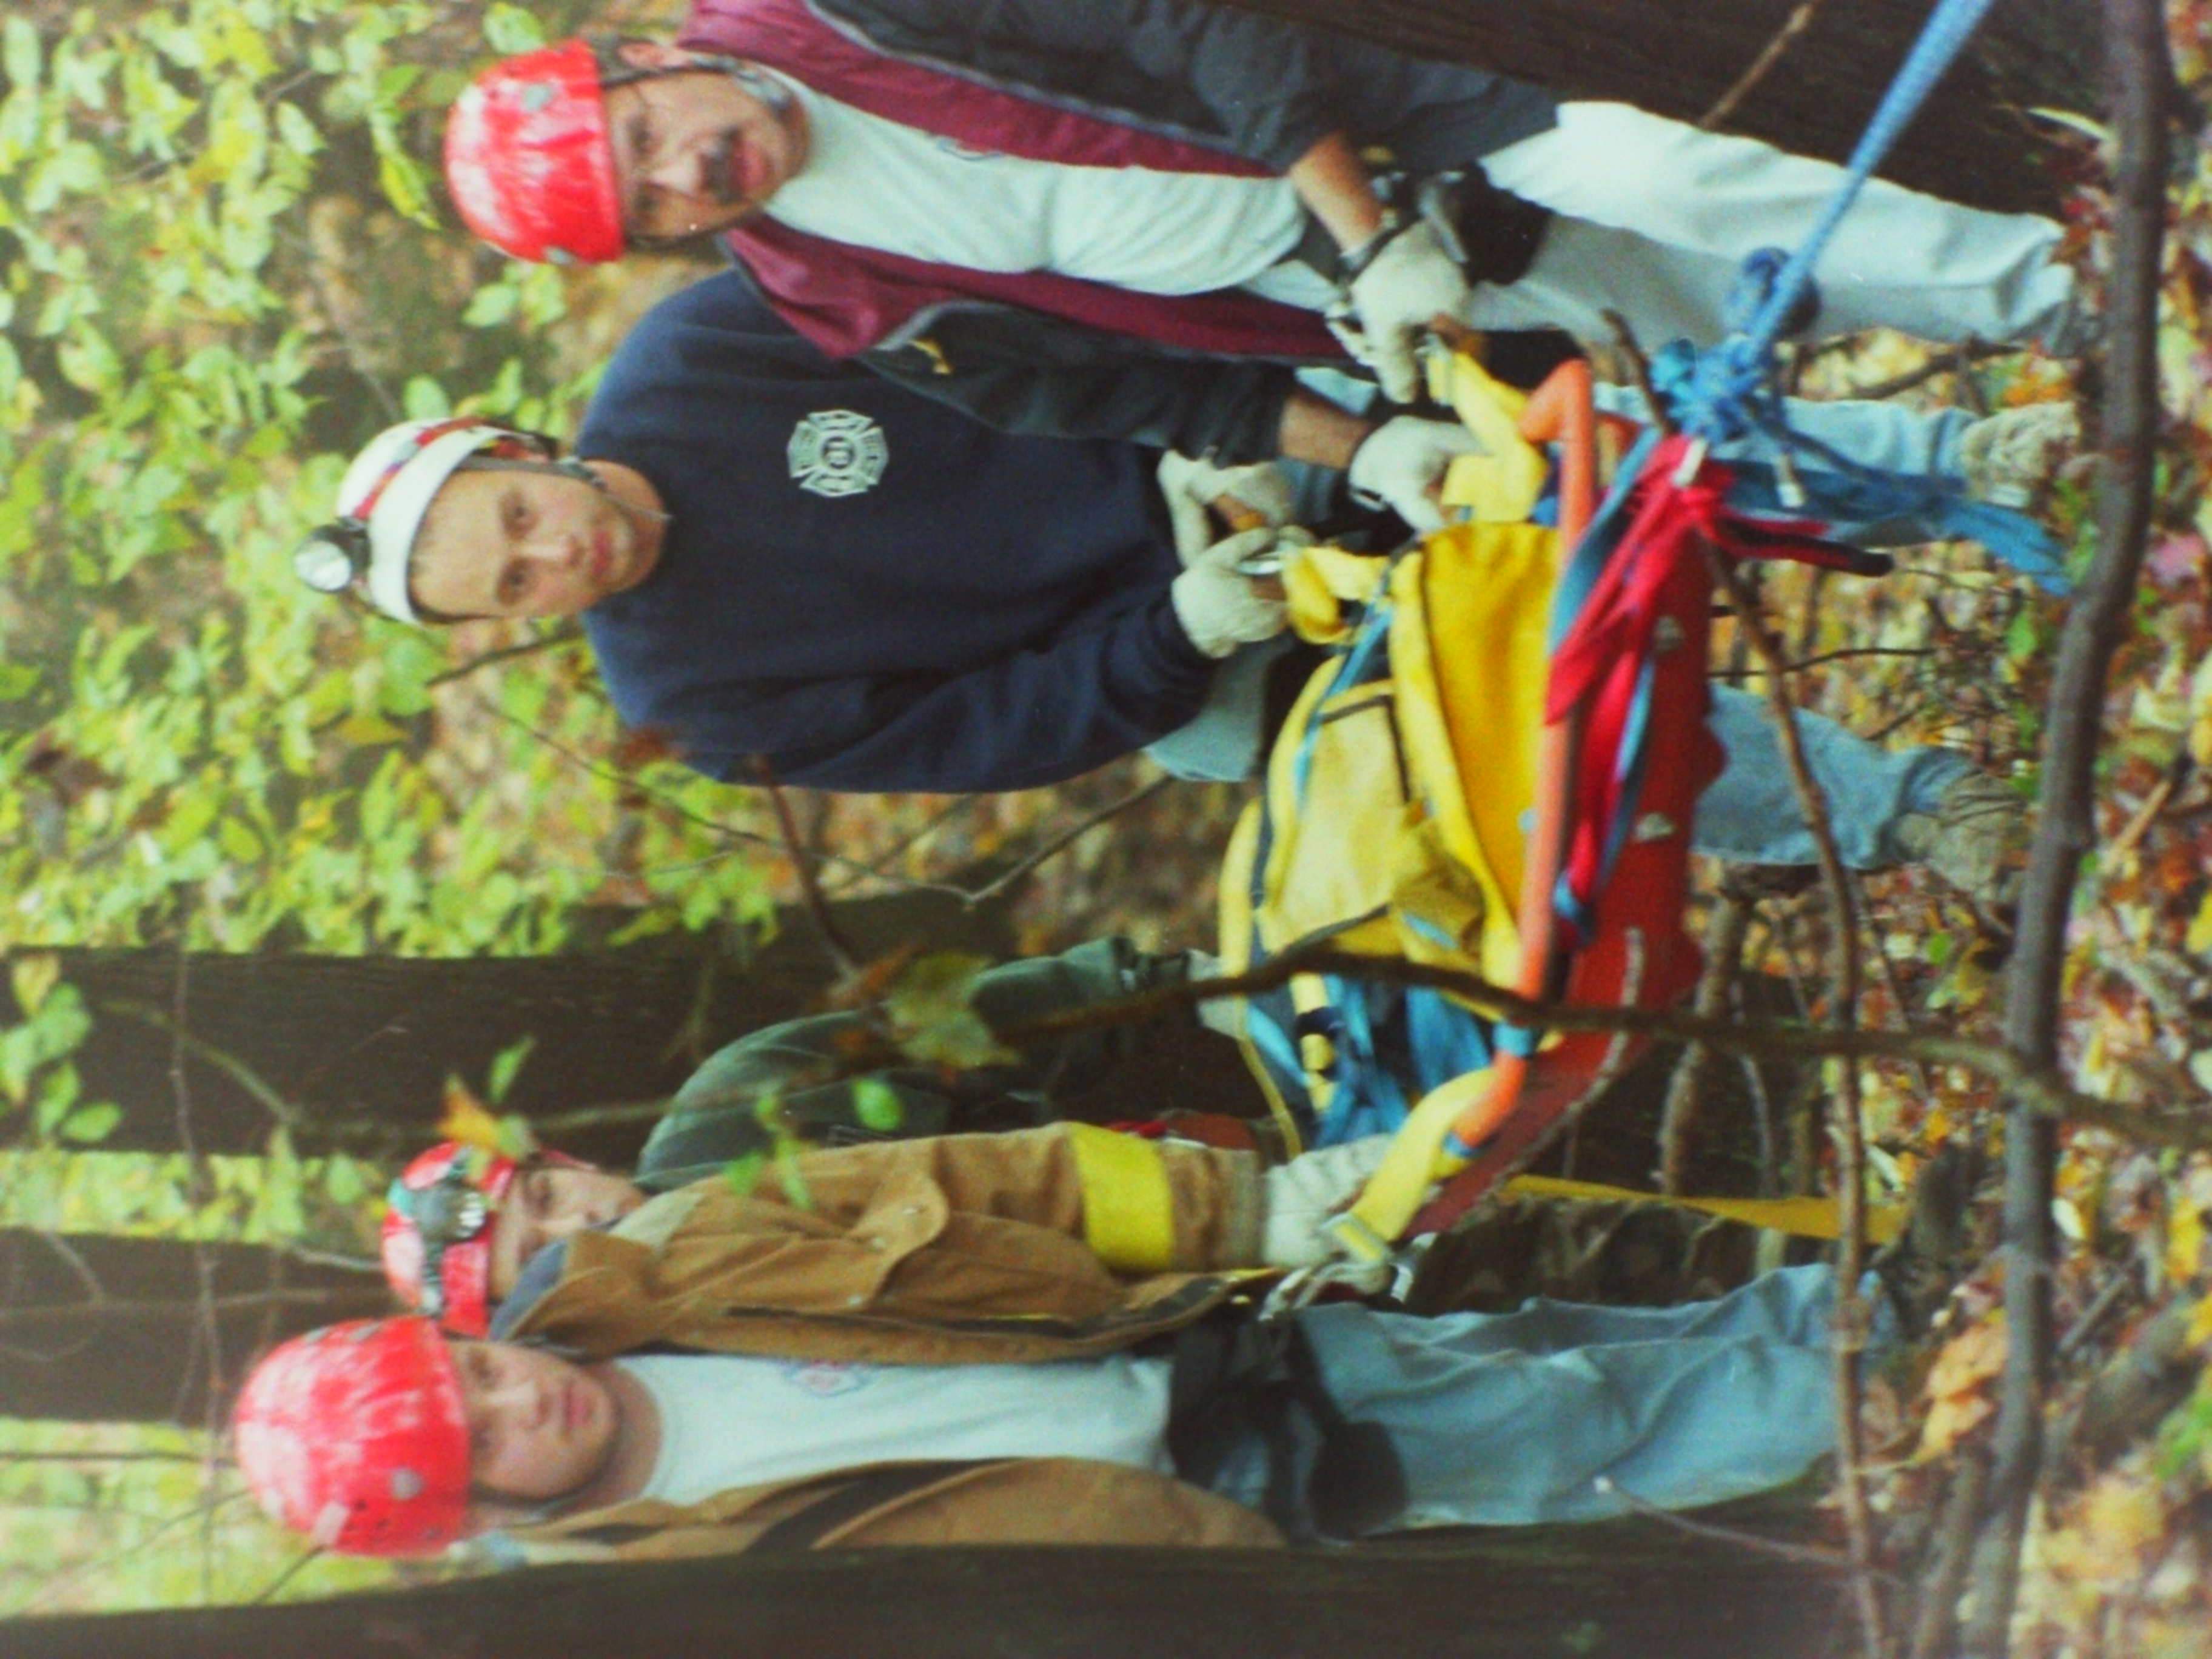 10-10-98  Training - Low Angle Rescue Team Training